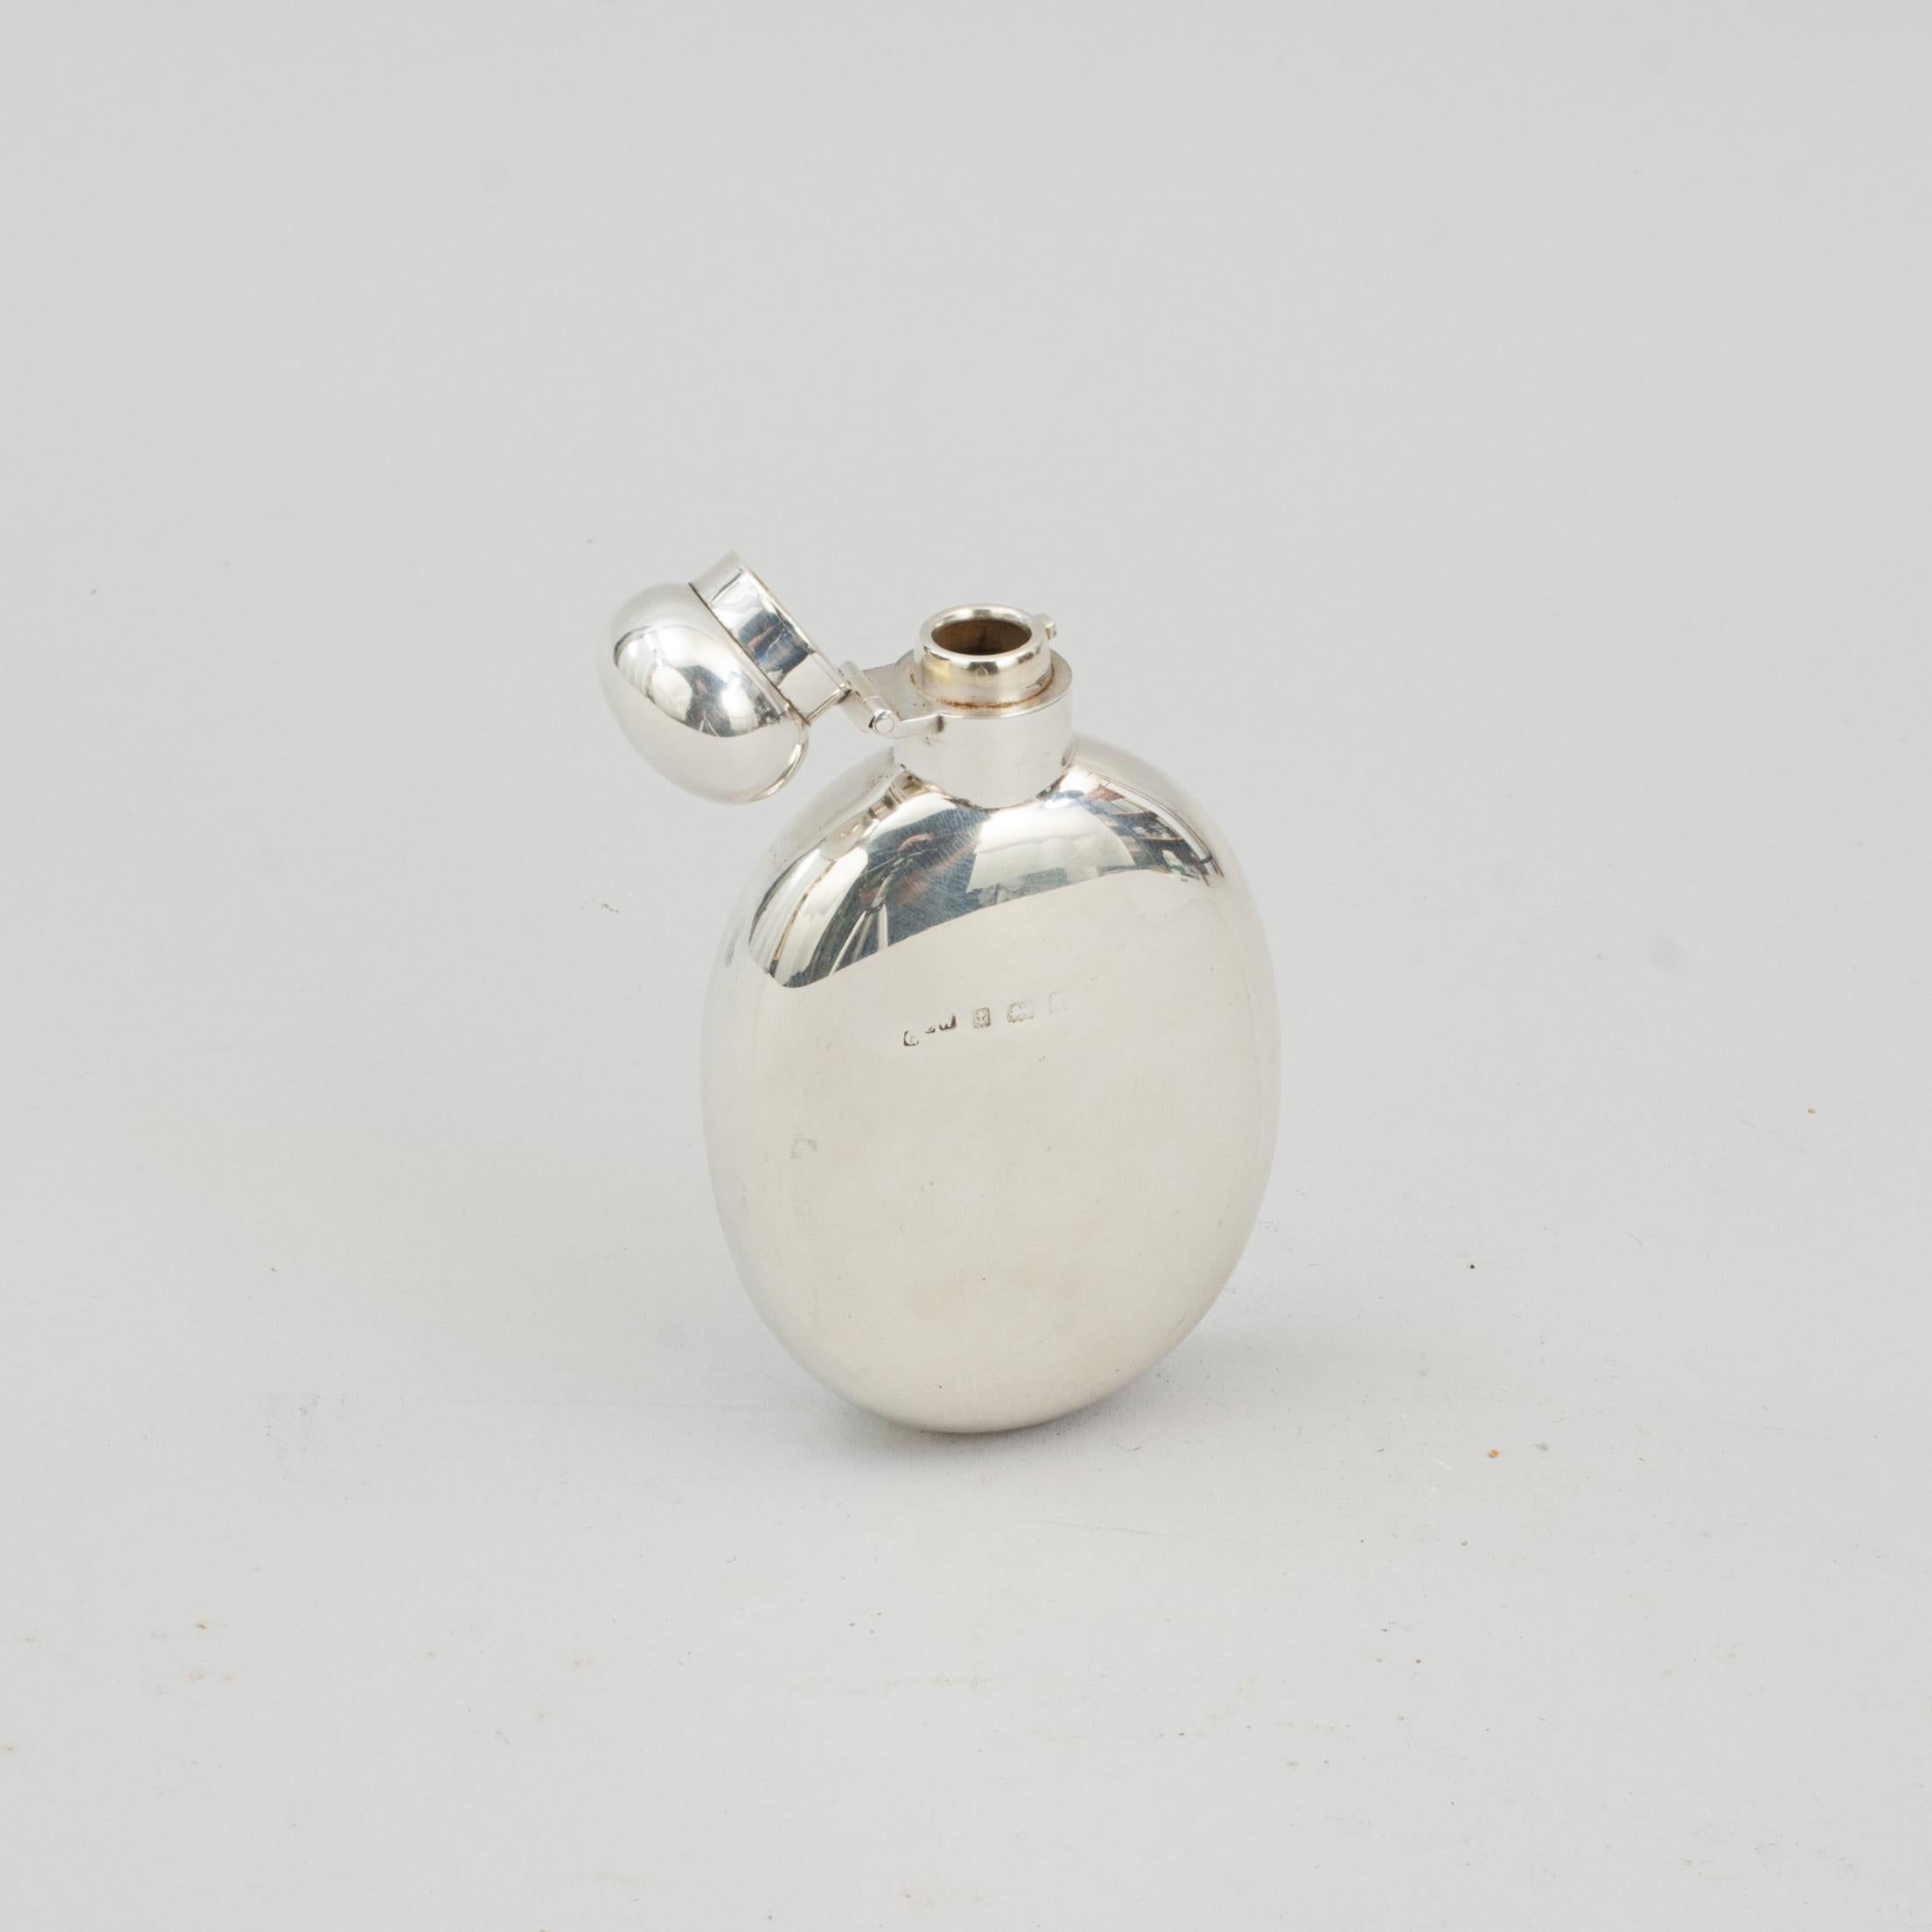 Silver Hip Flask.
A beautiful gentleman's oval pocket silver hip flask with a curved profile. This exceptional hip flask with plain domed hinged lid with screw bayonet fitting. The hallmarks have been rubbed and are difficult to read but there is a